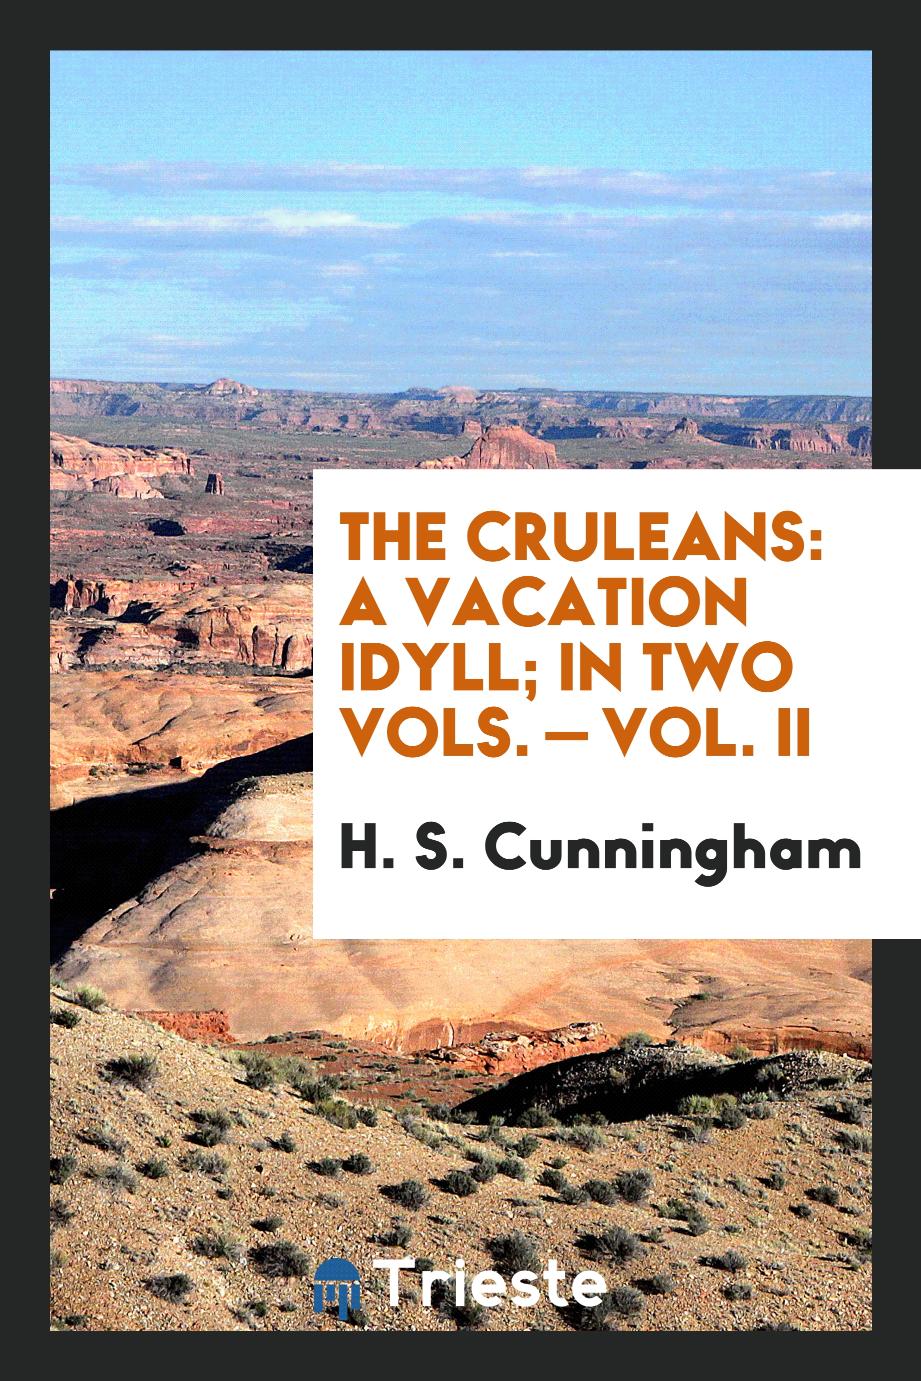 The Cruleans: A Vacation Idyll; In Two Vols. — Vol. II